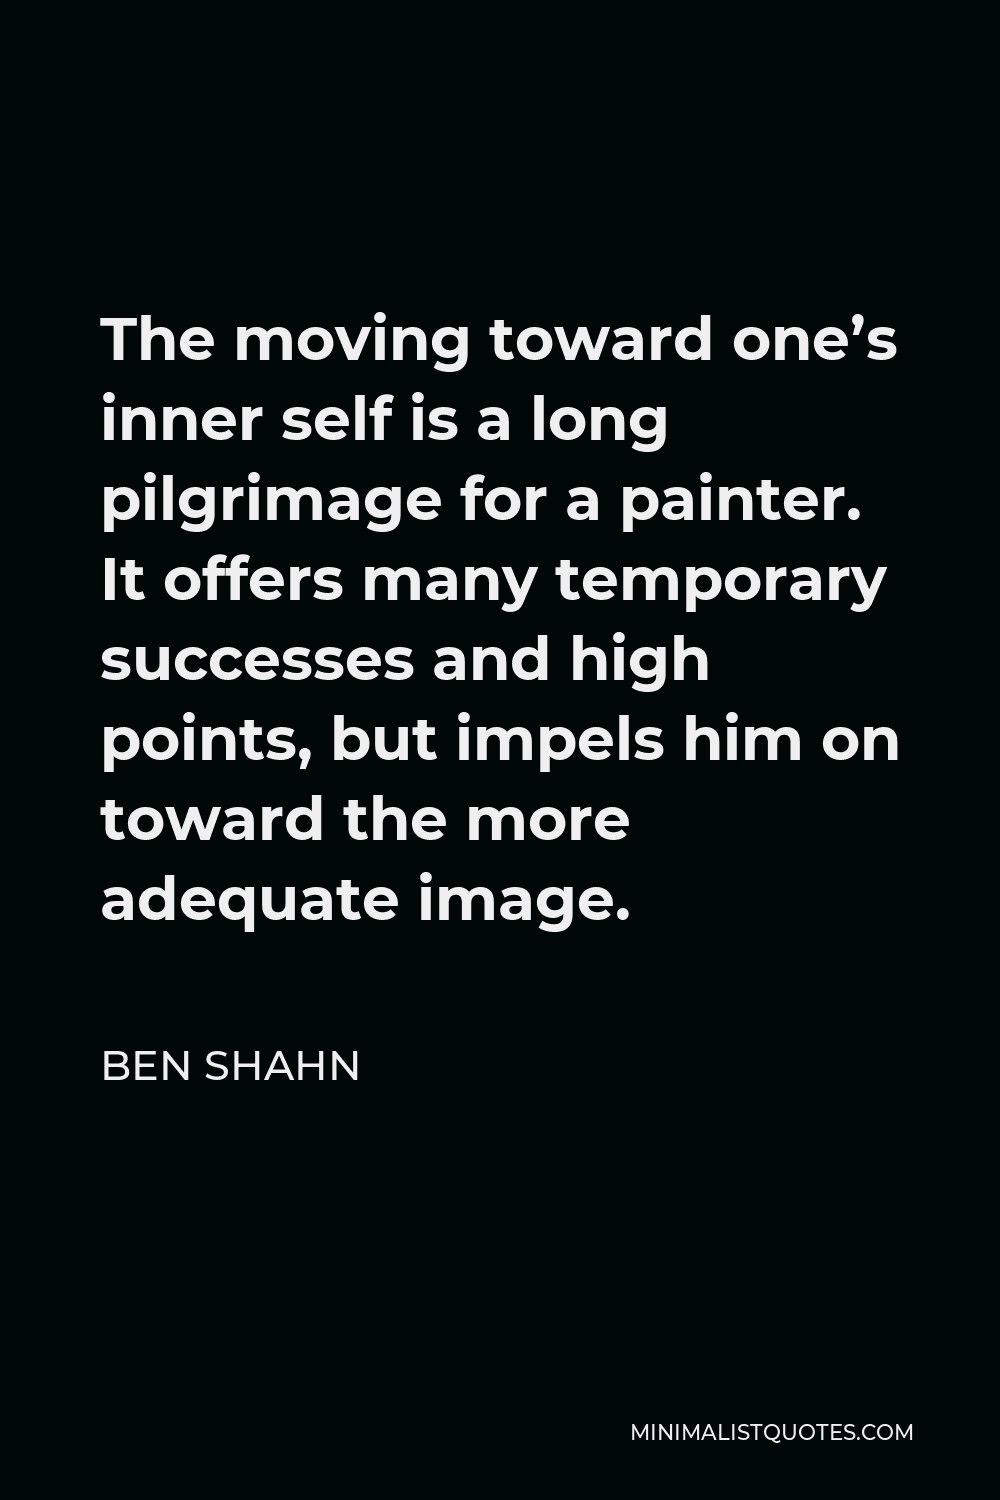 Ben Shahn Quote - The moving toward one’s inner self is a long pilgrimage for a painter. It offers many temporary successes and high points, but impels him on toward the more adequate image.